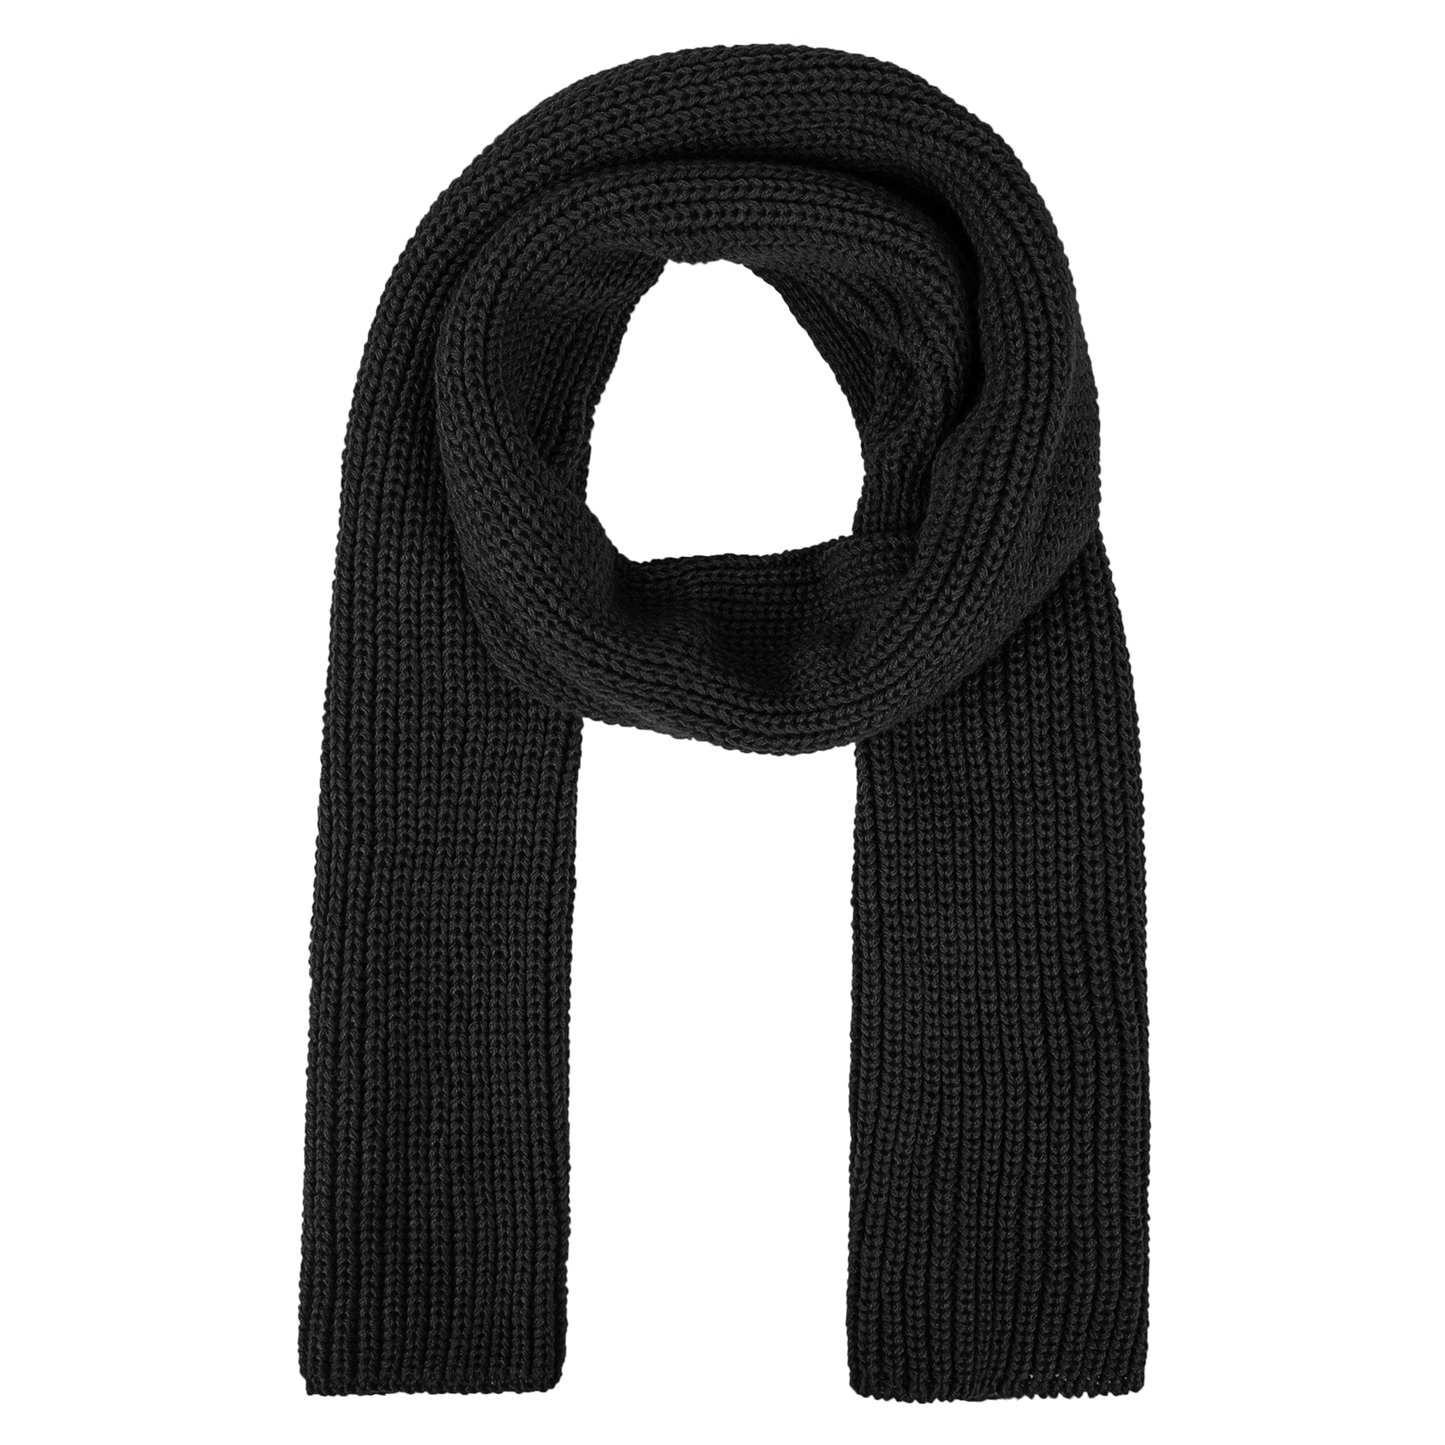 Loritta Scarf for Women and Men, Winter Thick Soft Knit Womens Scarves and Shawl